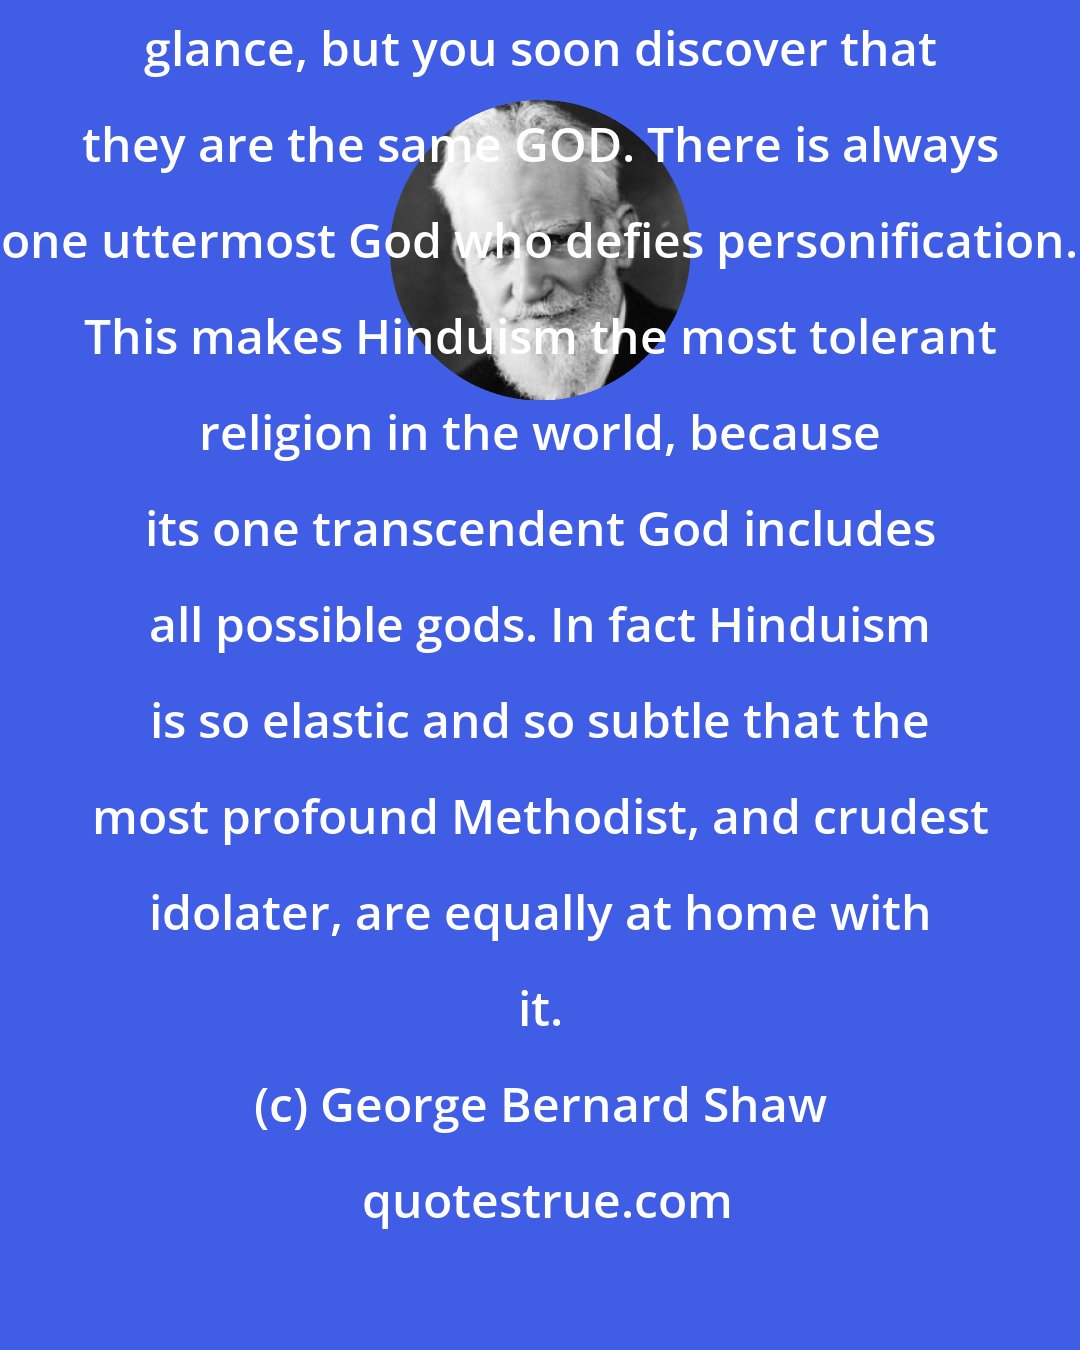 George Bernard Shaw: The apparent multiplication of gods is bewildering at the first glance, but you soon discover that they are the same GOD. There is always one uttermost God who defies personification. This makes Hinduism the most tolerant religion in the world, because its one transcendent God includes all possible gods. In fact Hinduism is so elastic and so subtle that the most profound Methodist, and crudest idolater, are equally at home with it.